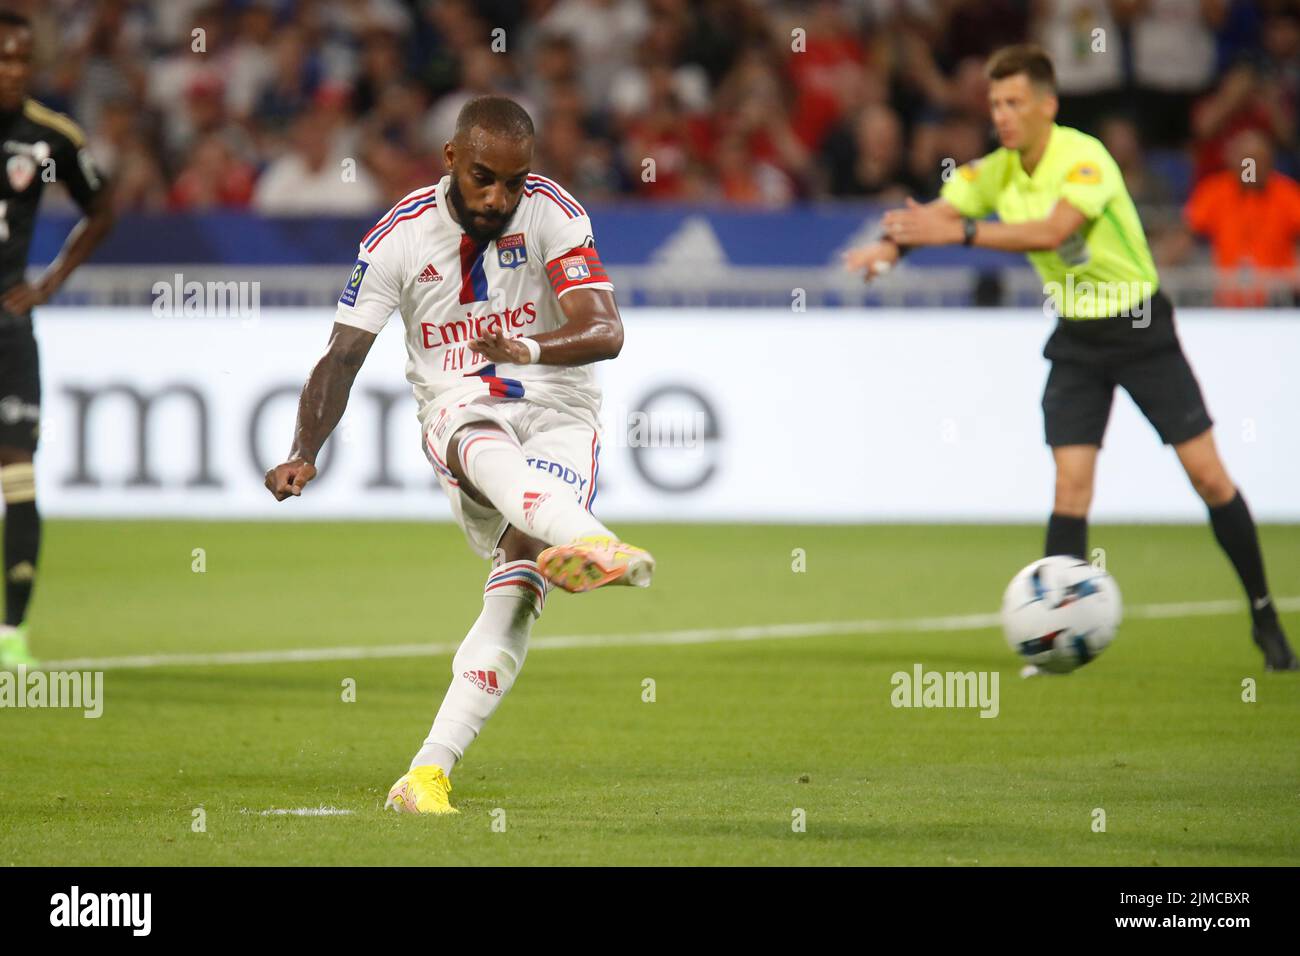 Alexandre LACAZETTE of Lyon score a goal during the French championship Ligue  1 football match between Olympique Lyonnais (Lyon) and AC Ajaccio on August  5, 2022 at Groupama stadium in Decines-Charpieu near